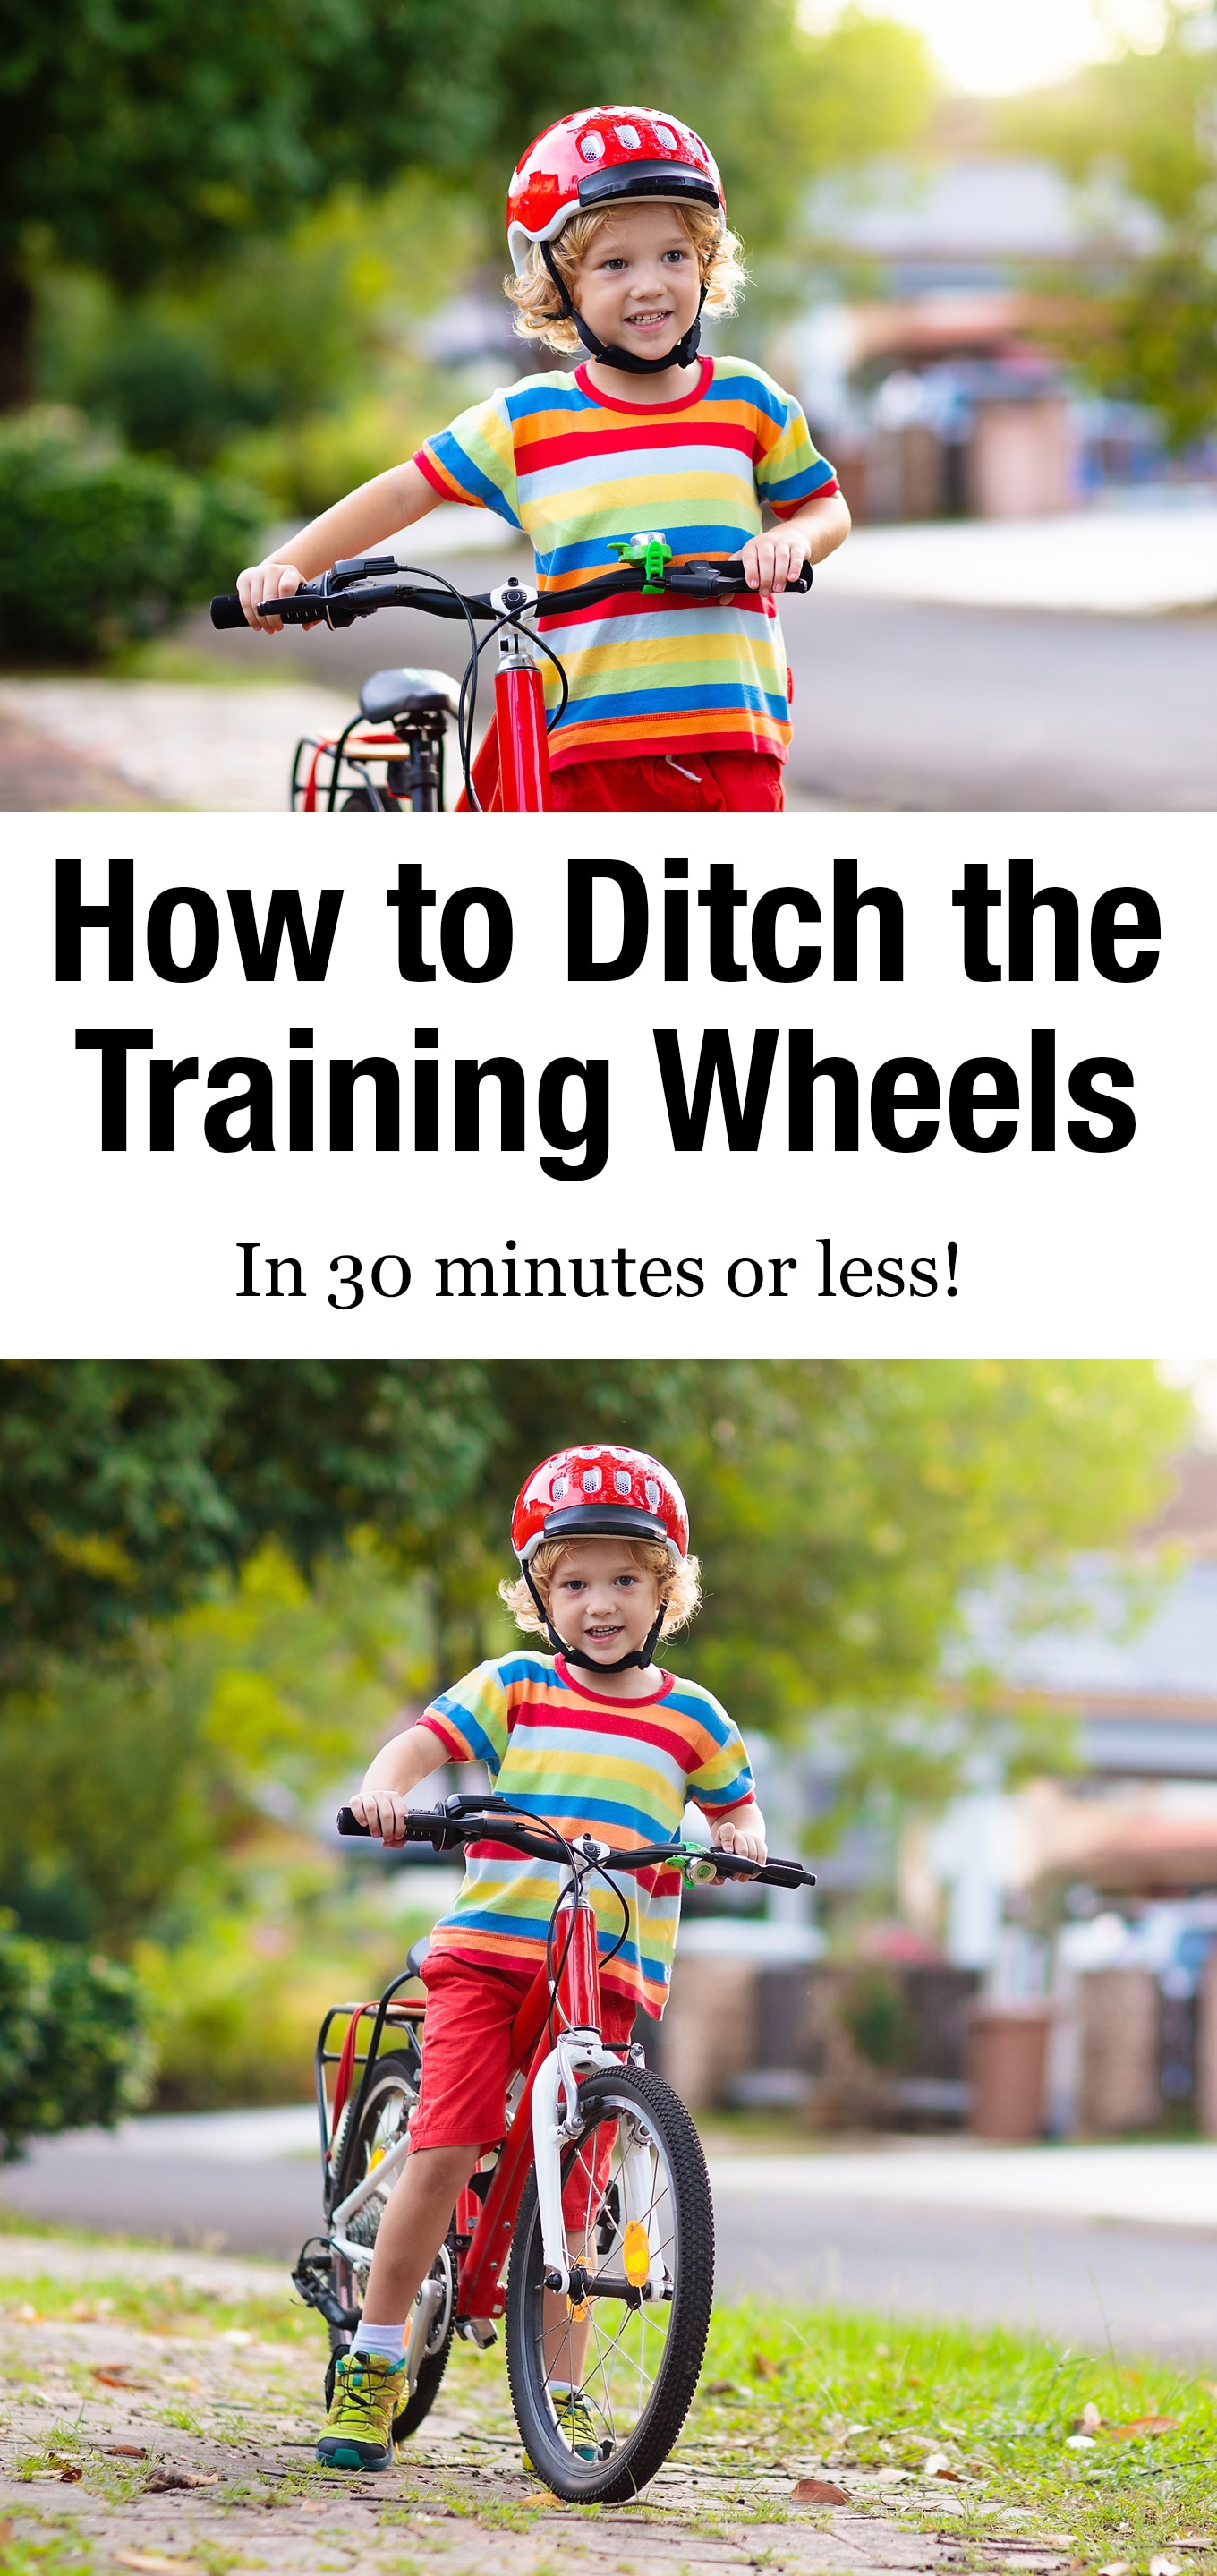 teaching 5 year old to ride bike without training wheels